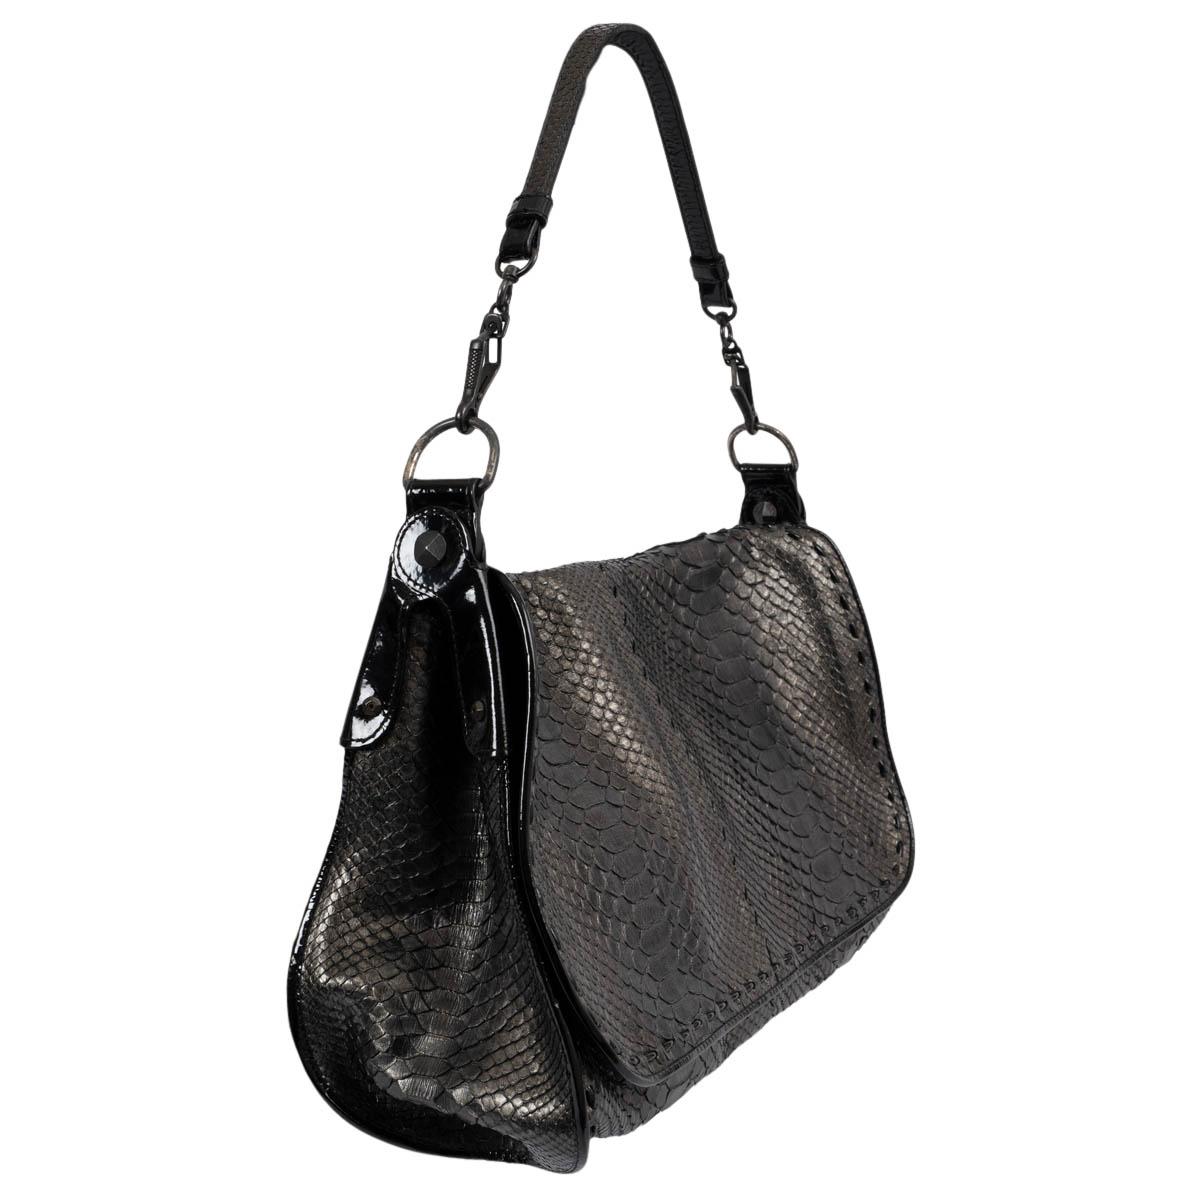 100% authentic Bottega Veneta flap shoulder bag in metallic dark silver python. Features black patent leather trims, gunmetal hardware and different length detachable shoulder straps. Closes with a flap. Lined in beige suede with an open pocket